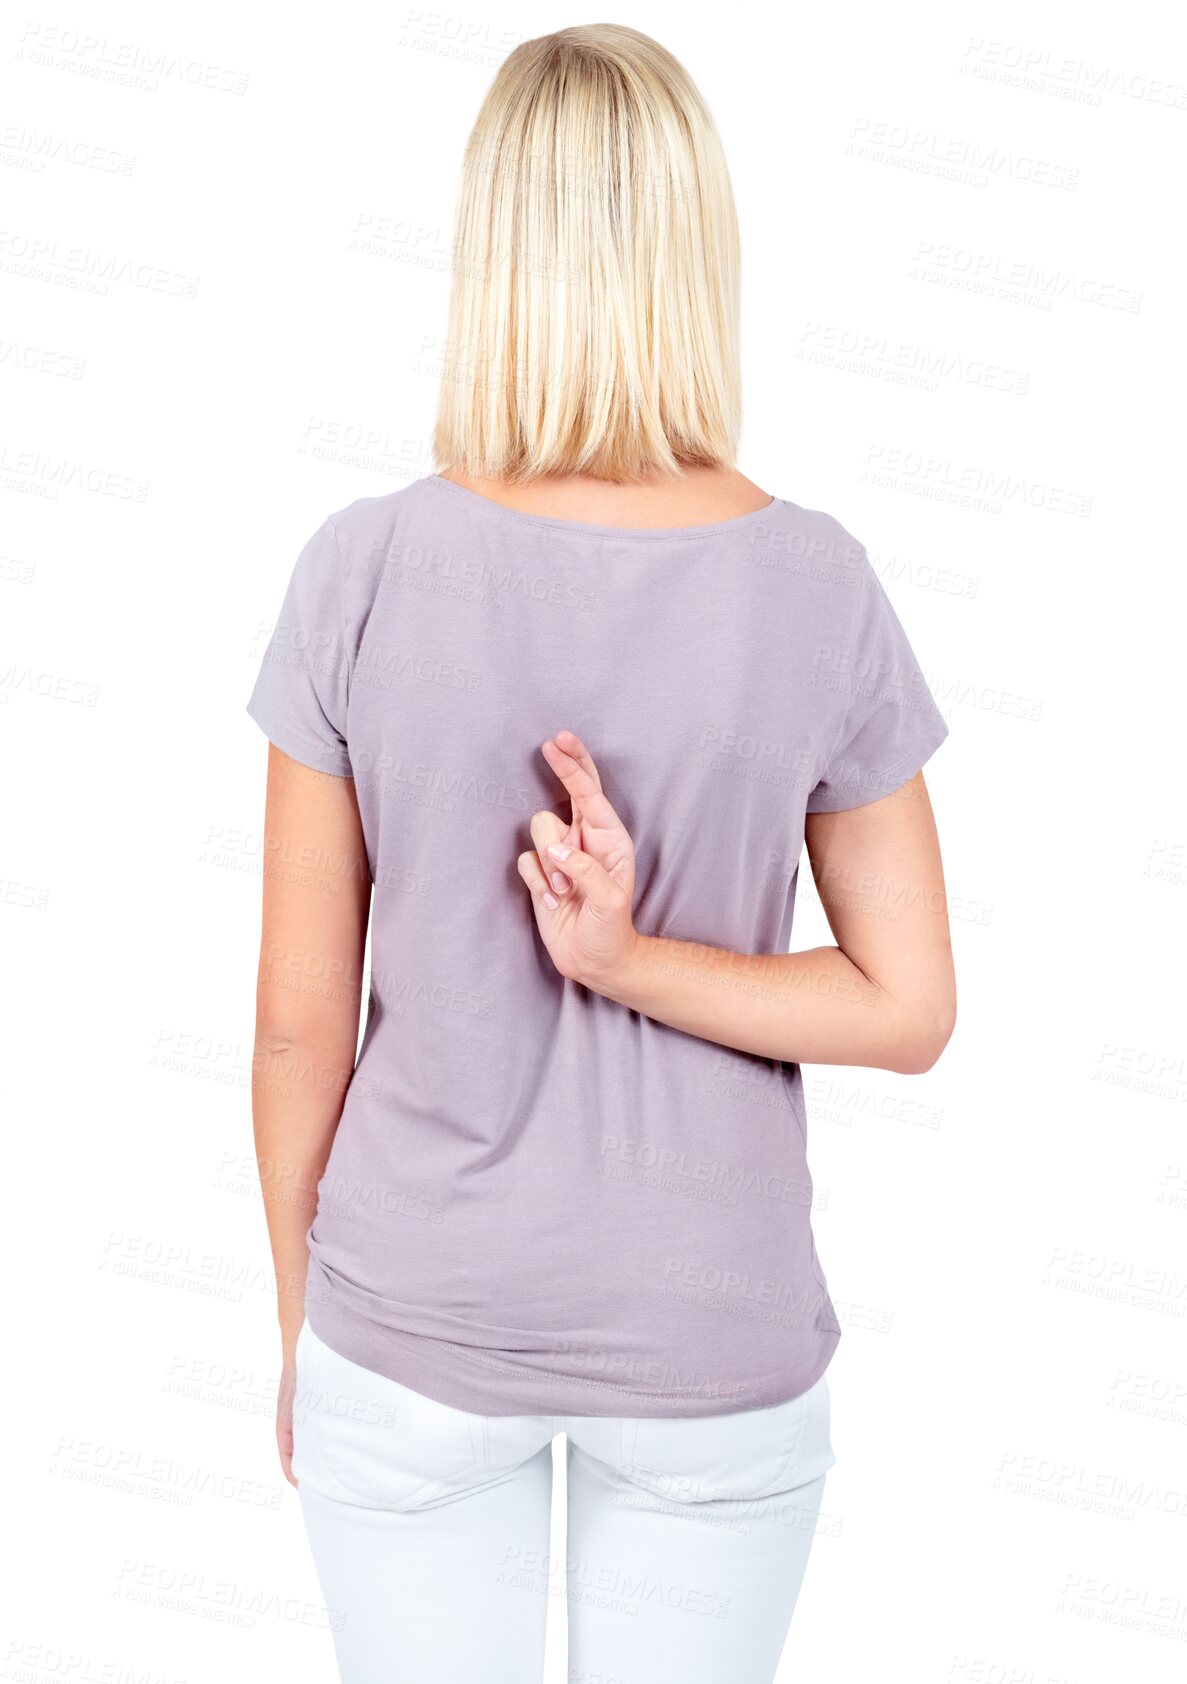 Buy stock photo Luck, fingers crossed and back of woman with hope on png, isolated and transparent background for wishing. Emoji, hand gesture and girl with sign for wishing, praying and lucky for winning prize